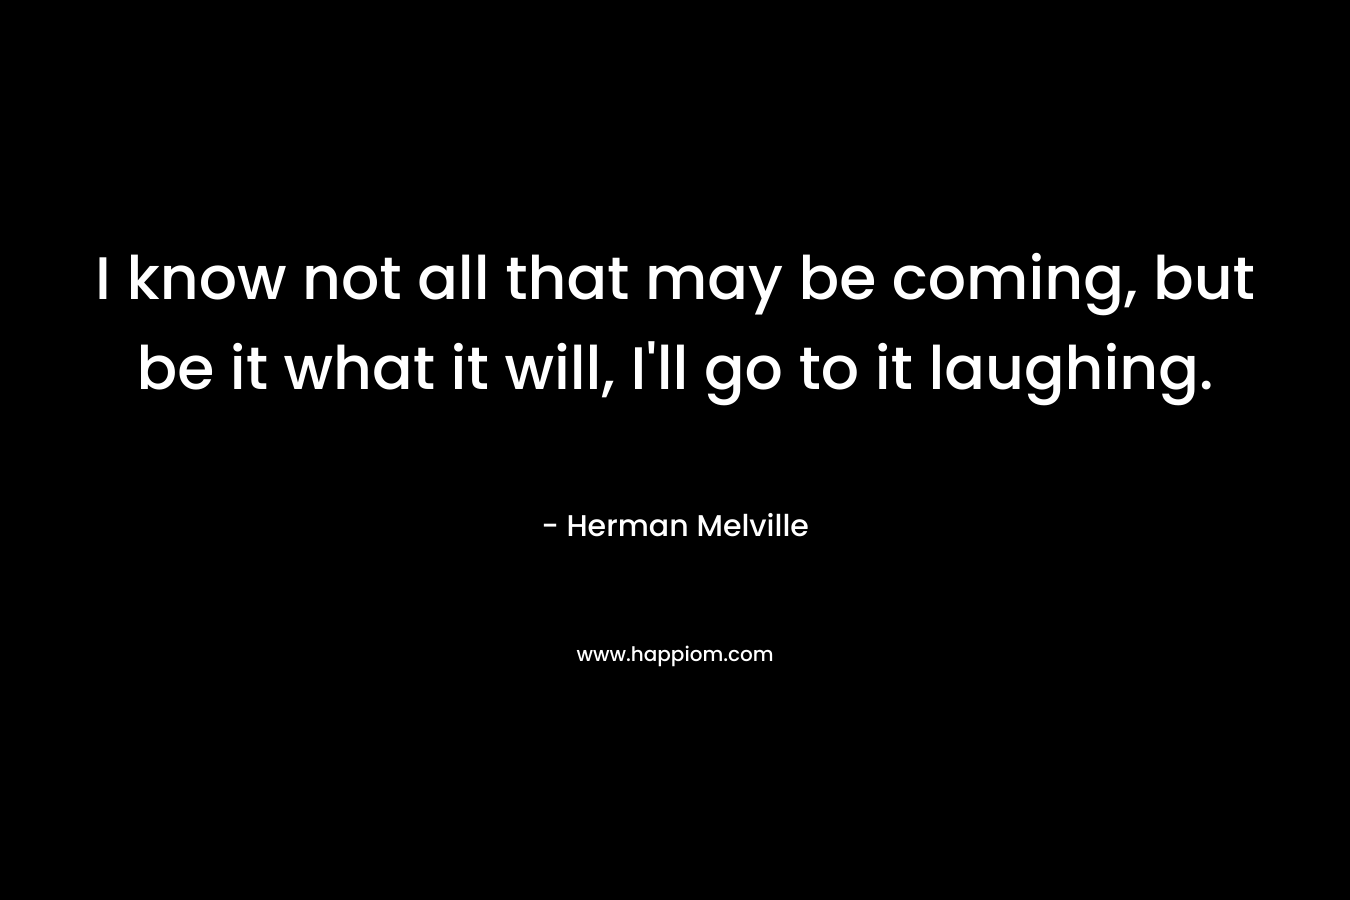 I know not all that may be coming, but be it what it will, I’ll go to it laughing. – Herman Melville